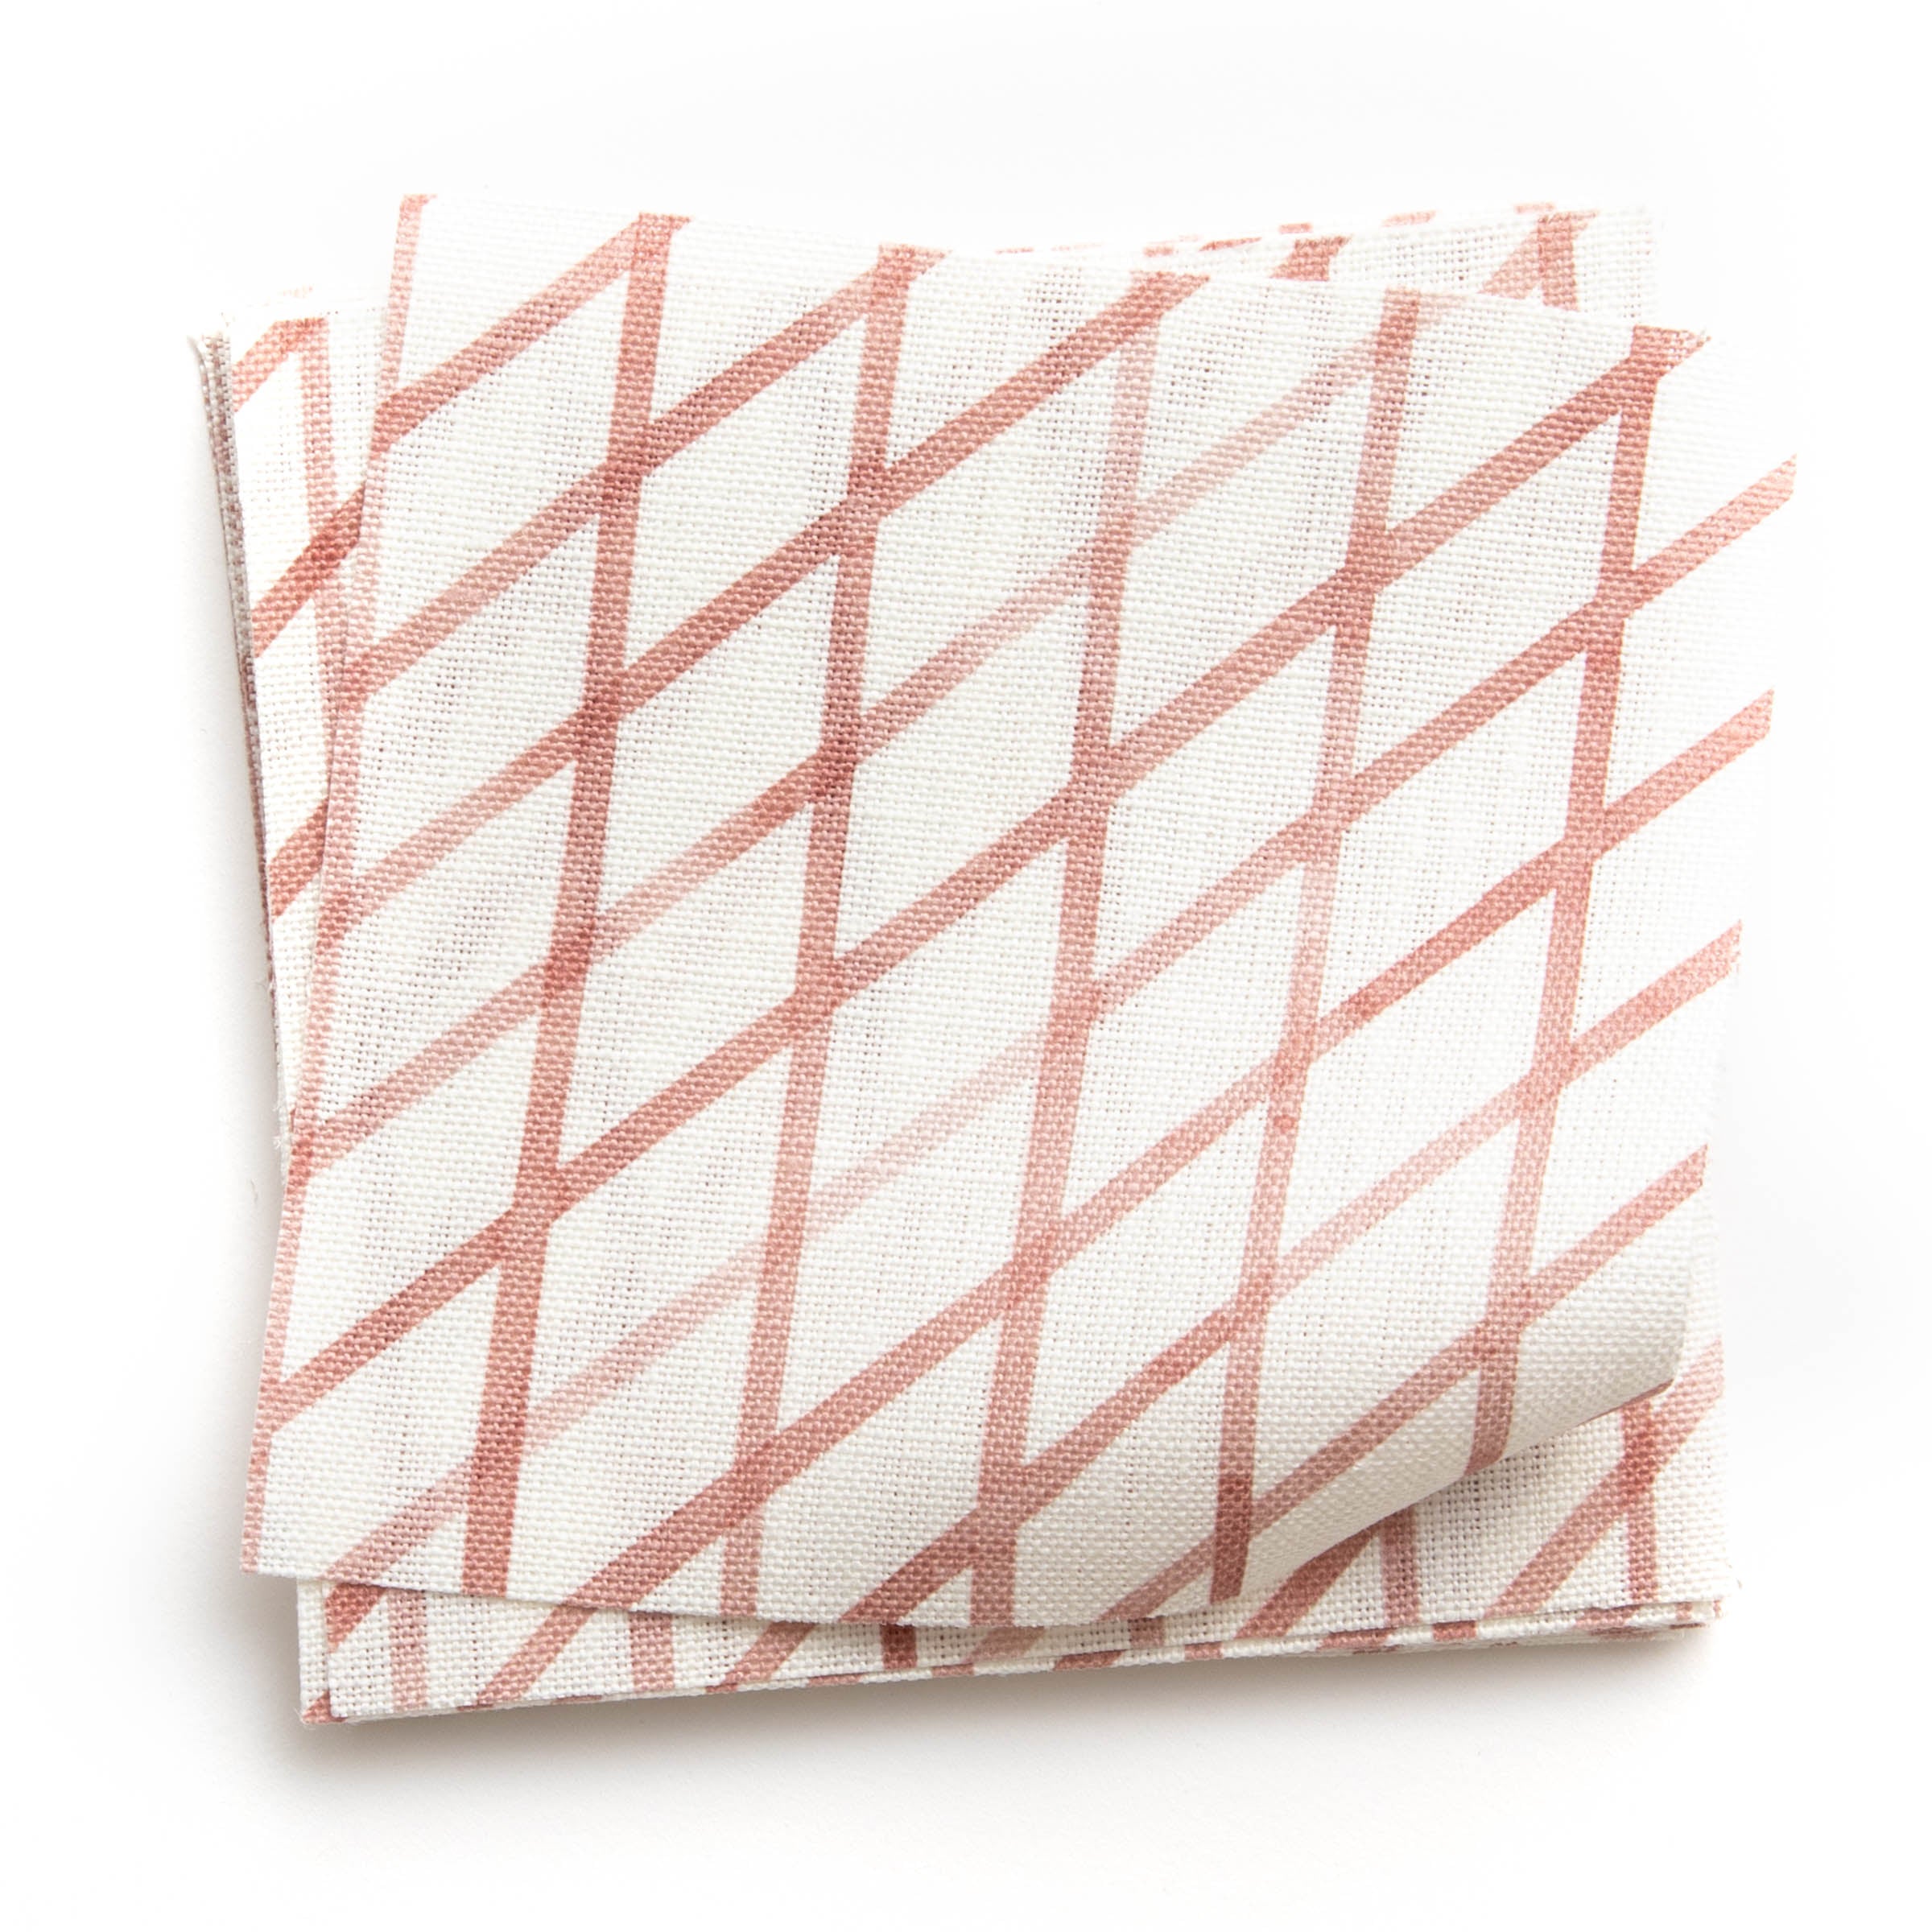 A stack of fabric swatches in an uneven grid pattern in rose on a white field.